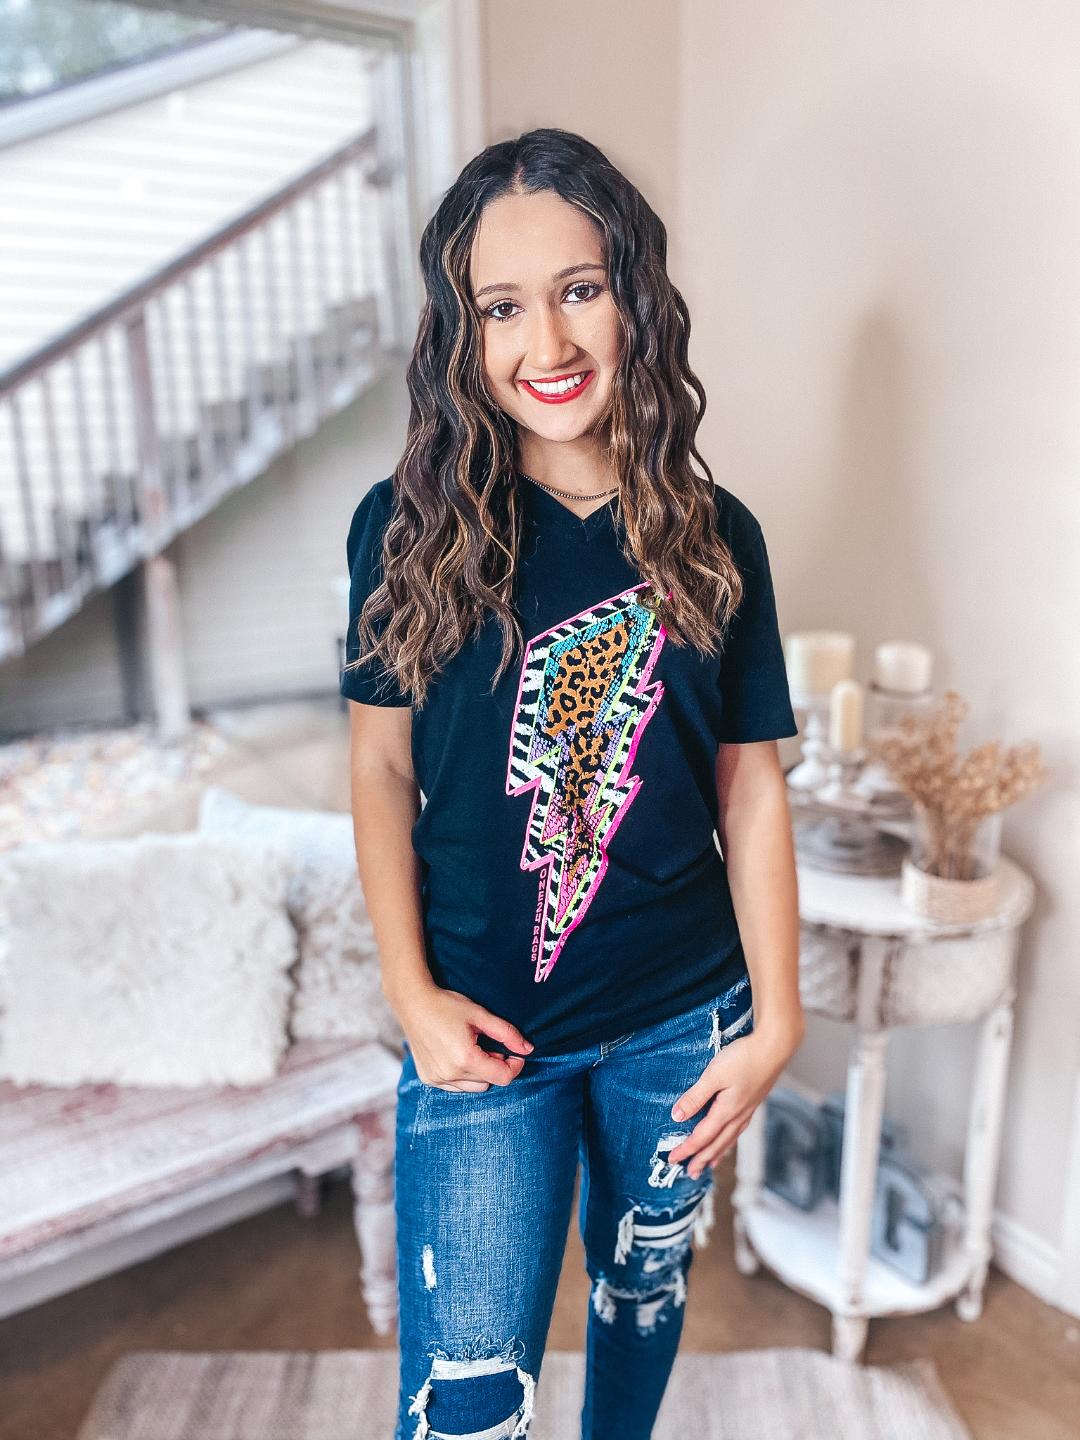 Light It Up Short Sleeve V Neck Lightning Bolt Graphic Tee in Neon - Giddy Up Glamour Boutique